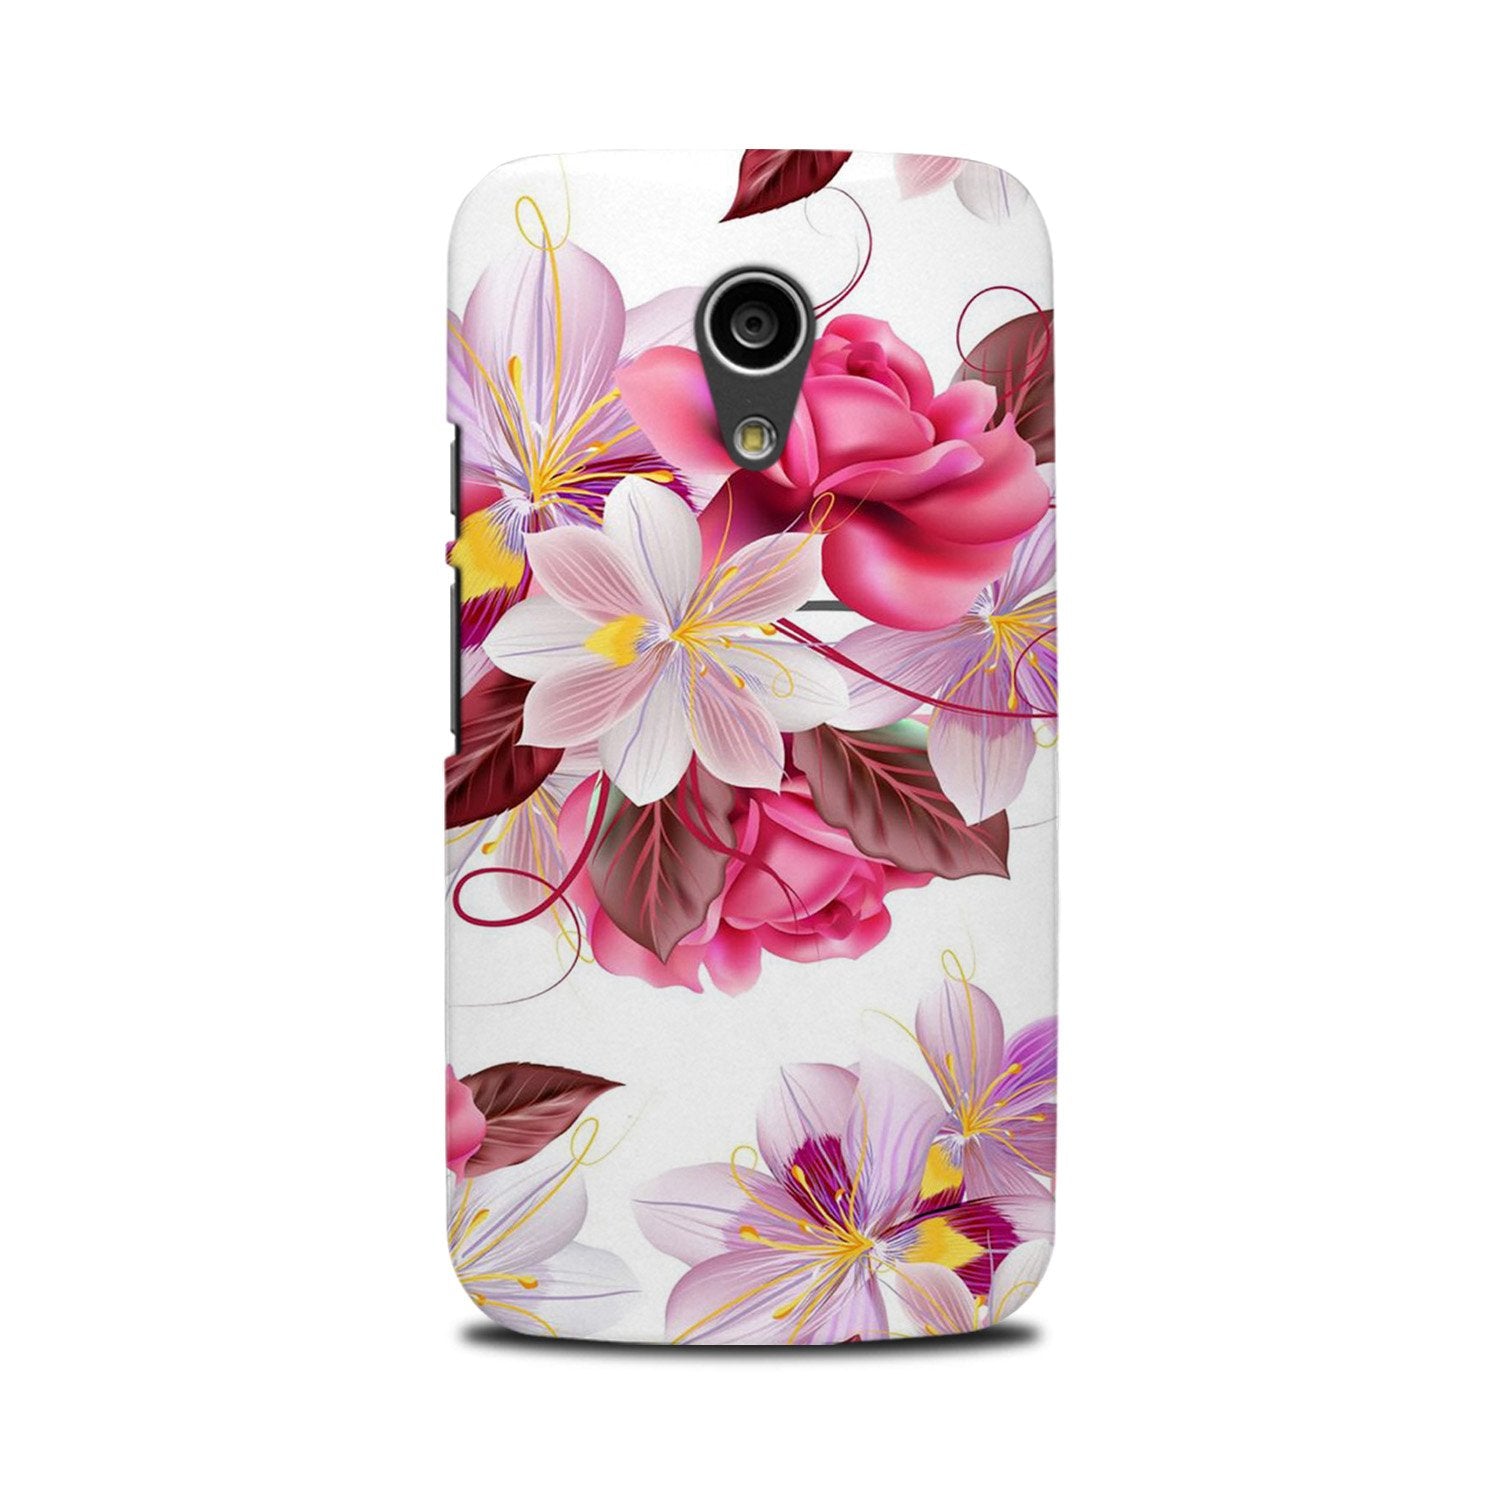 Beautiful flowers Case for Moto G2